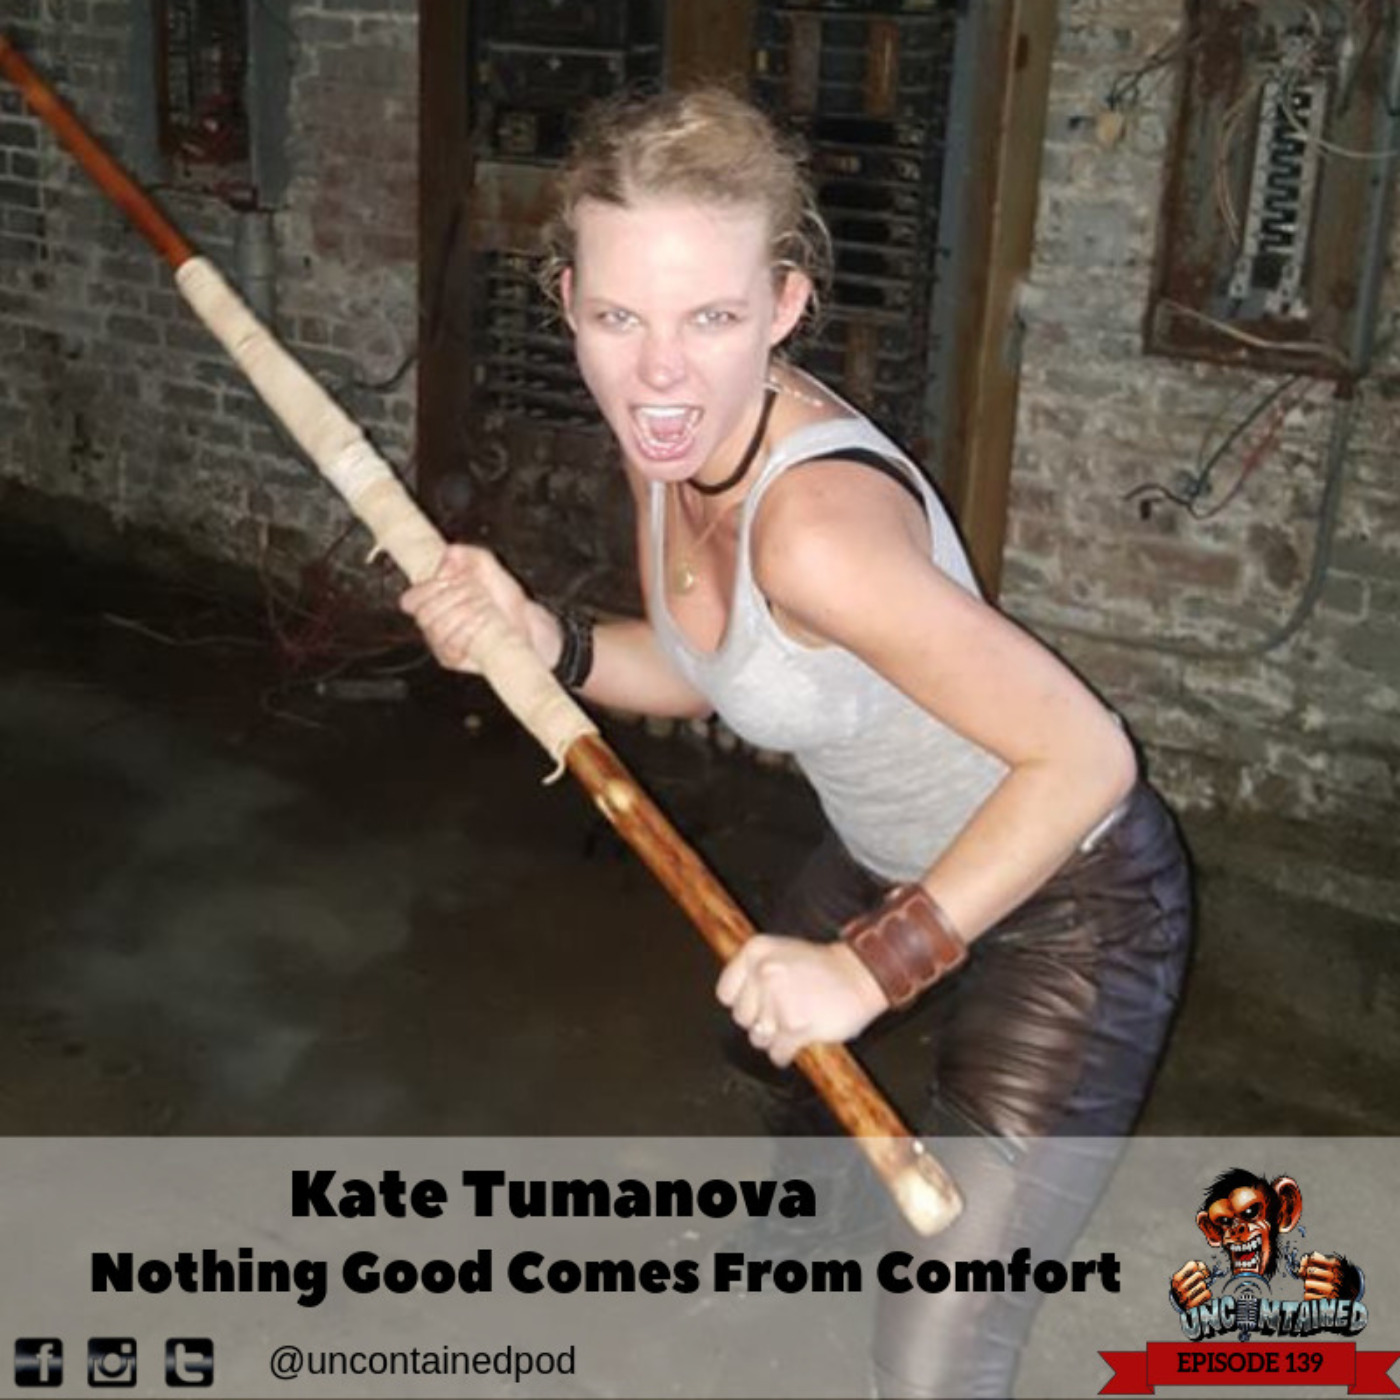 Episode 139: Kate Tumanova - Nothing Good Comes From Comfort